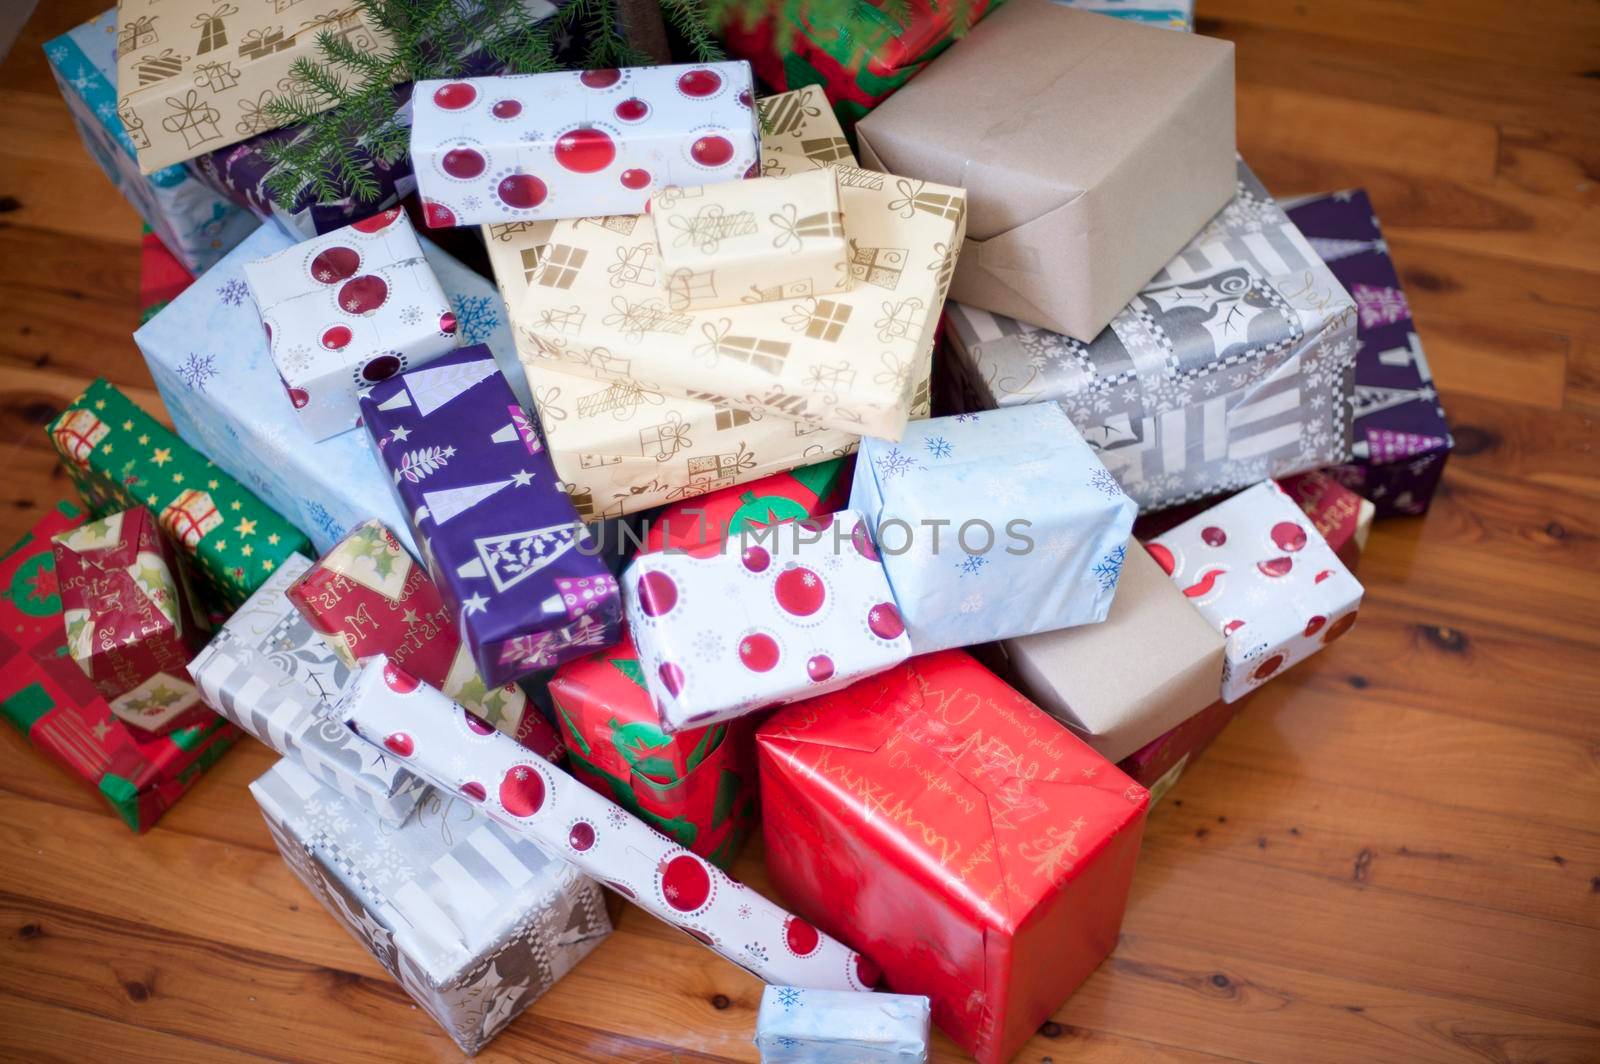 High angle view of a large pile of pretty colourful Christmas gifts in a variety of patterned gift wrap on a hardwood floor in a home